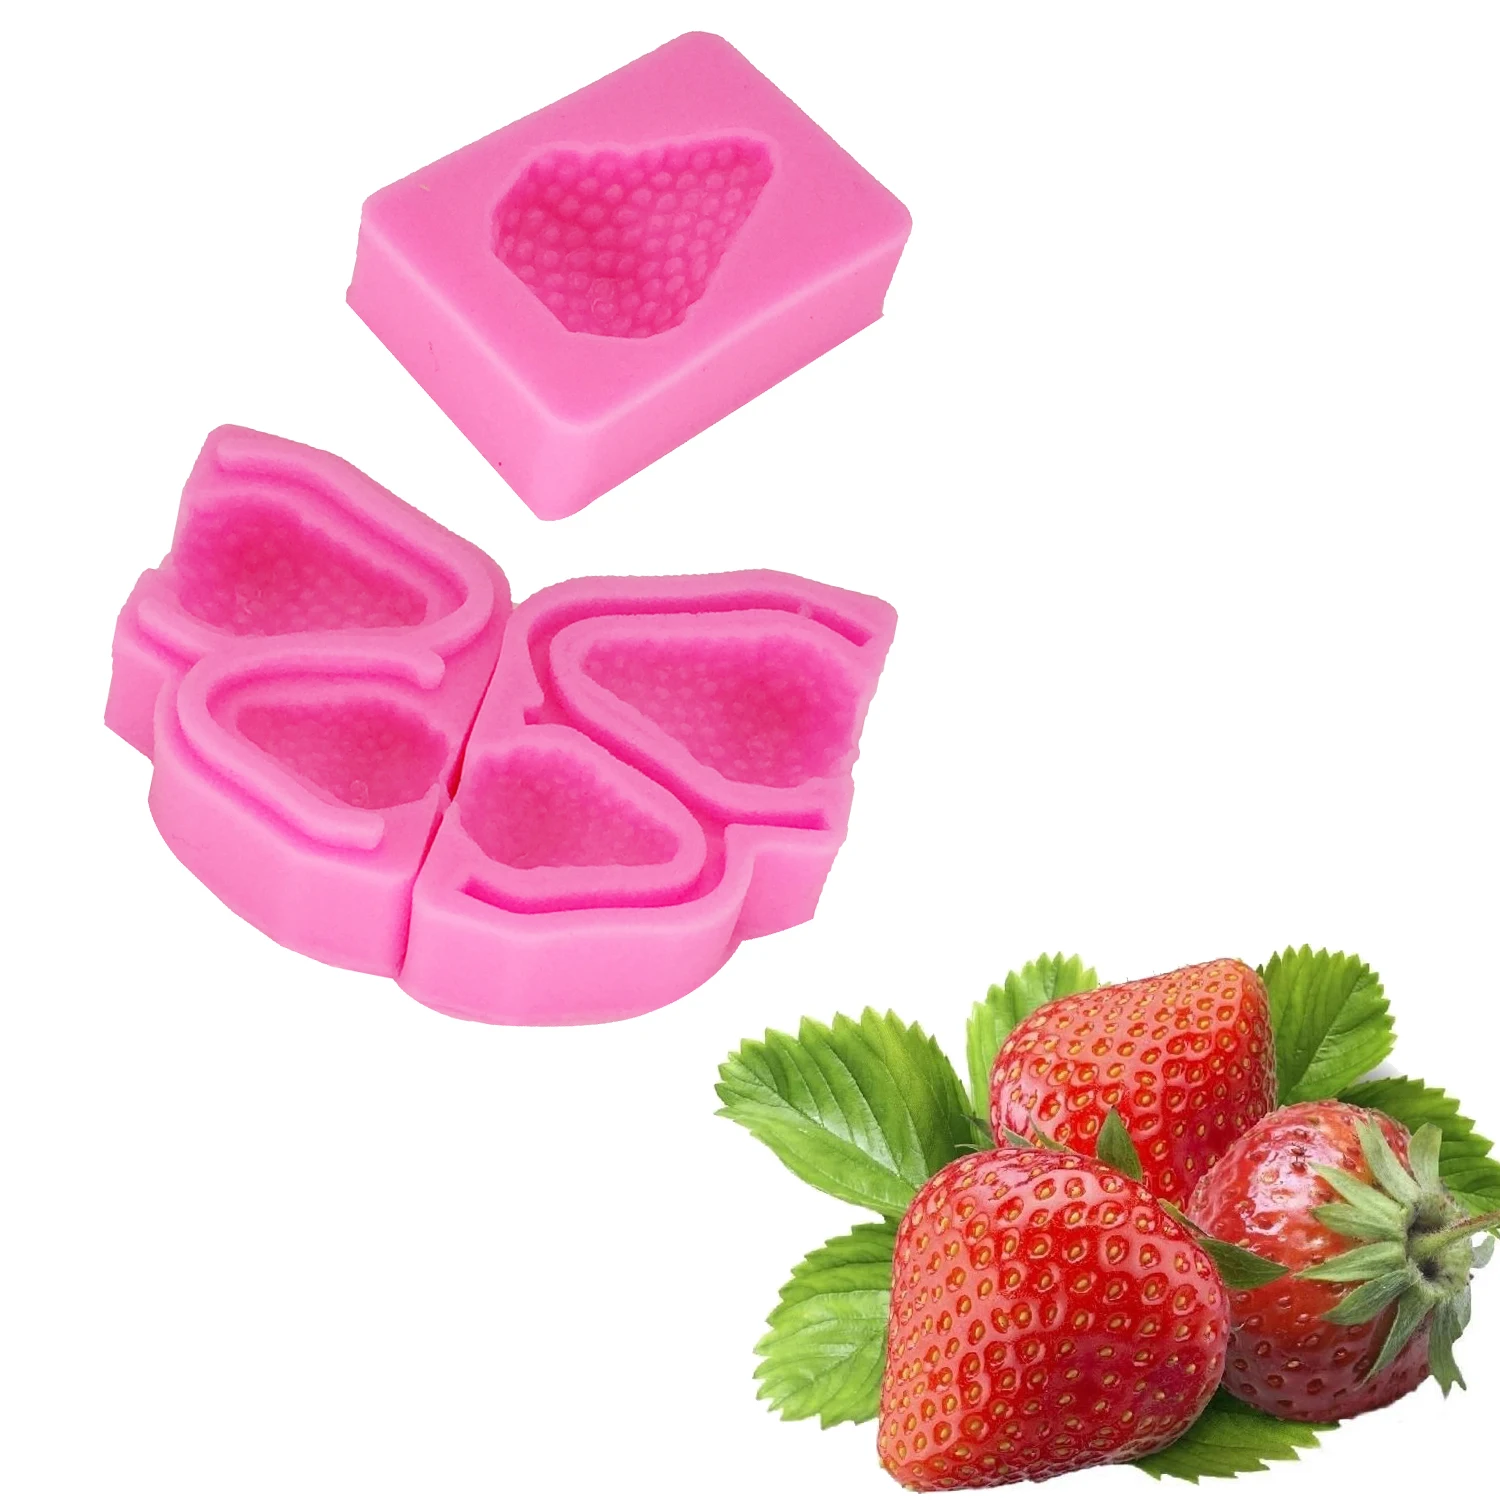 Strawberry Silicone Mold Fondant Mould 3D Cake Decorating Tool Moulds Design